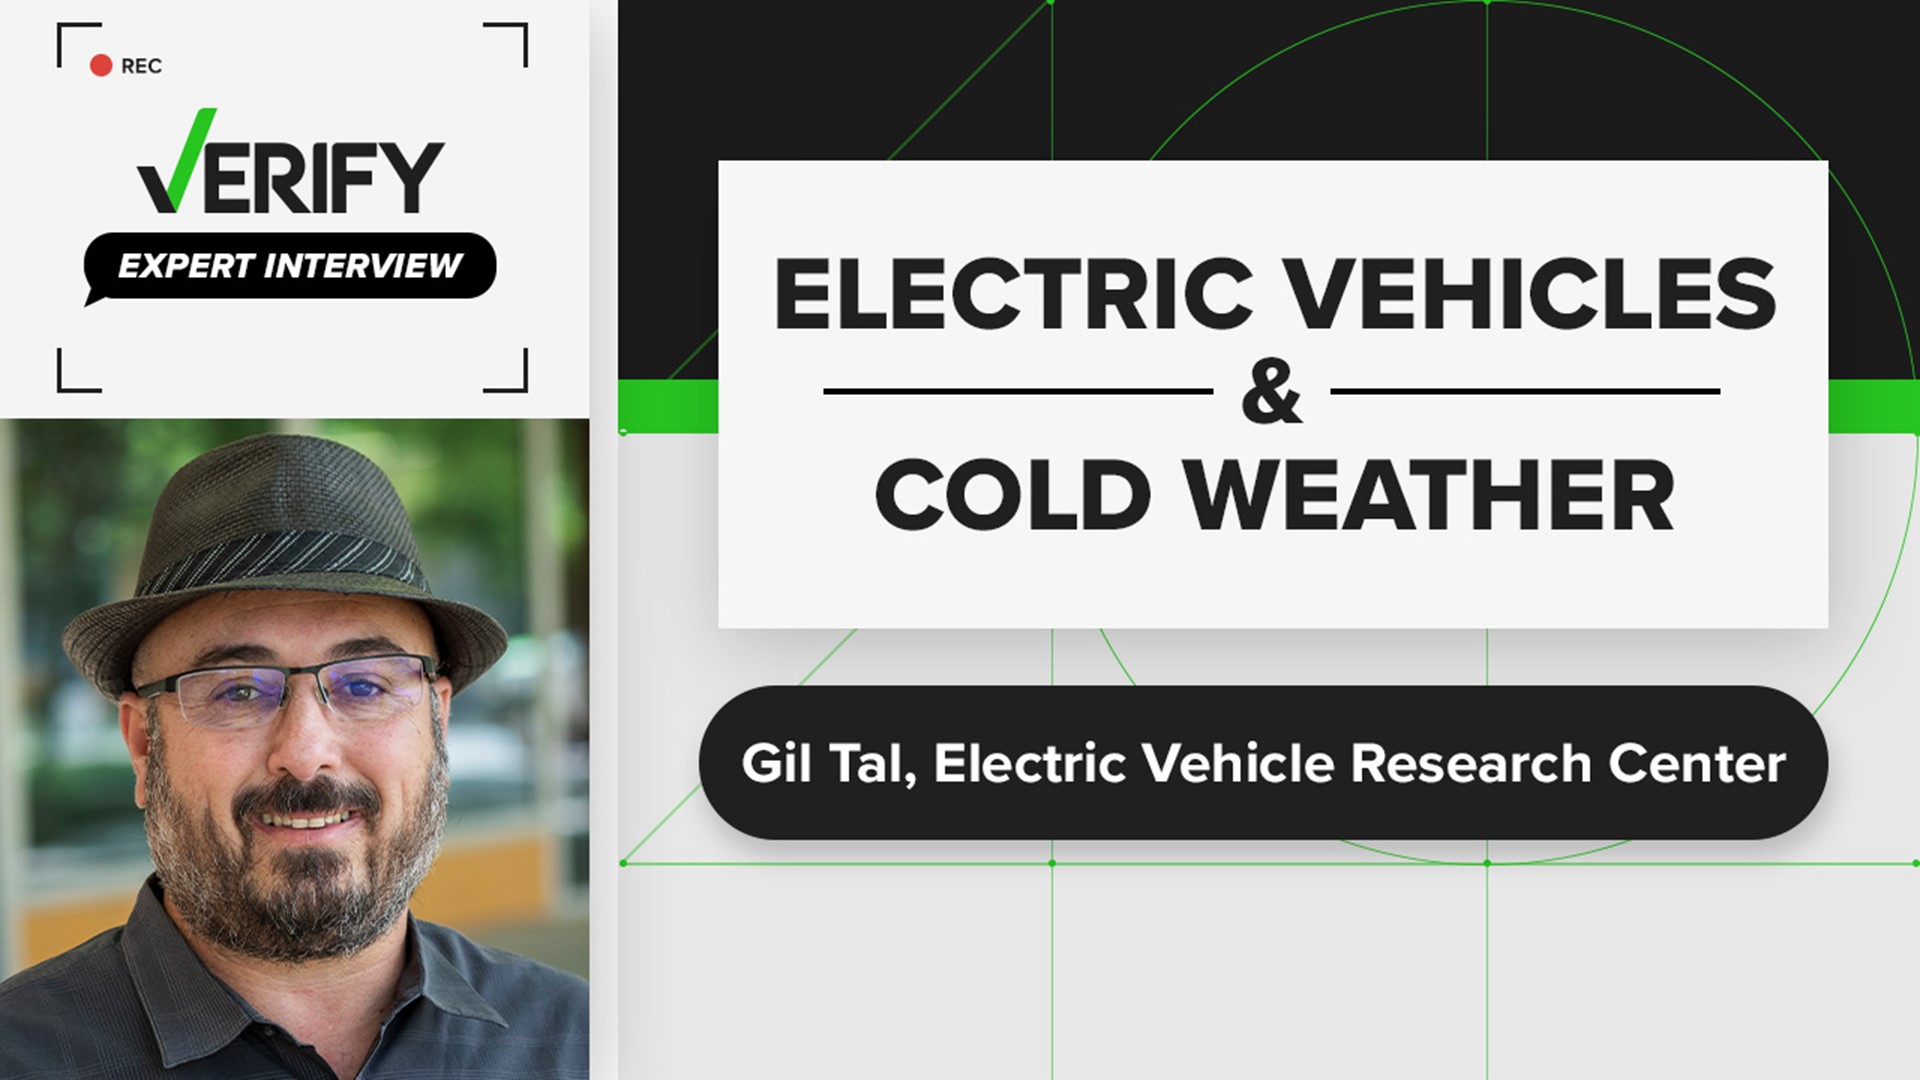 A VERIFY viewer wondered if batteries in electric cars drain faster when it’s cold out. EV specialist Gil Tal, Ph.D. breaksdown how cold weather effects the range of